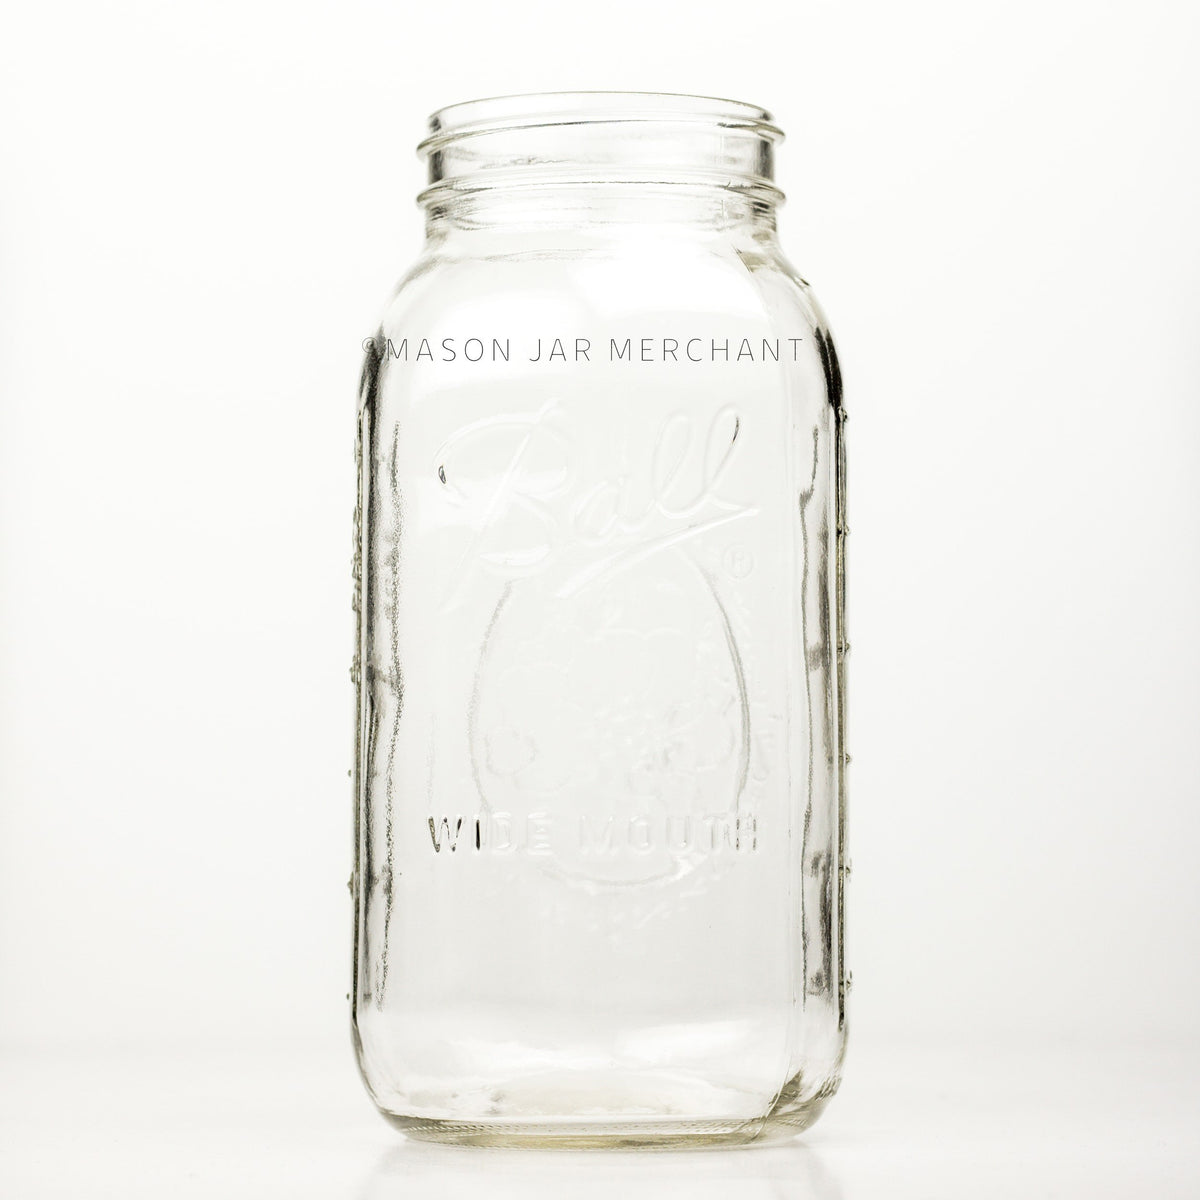 Wide mouth half-gallon mason jar with Ball Wide mouth logo, and fruity oval design visible on the back side of the jar. against a white background